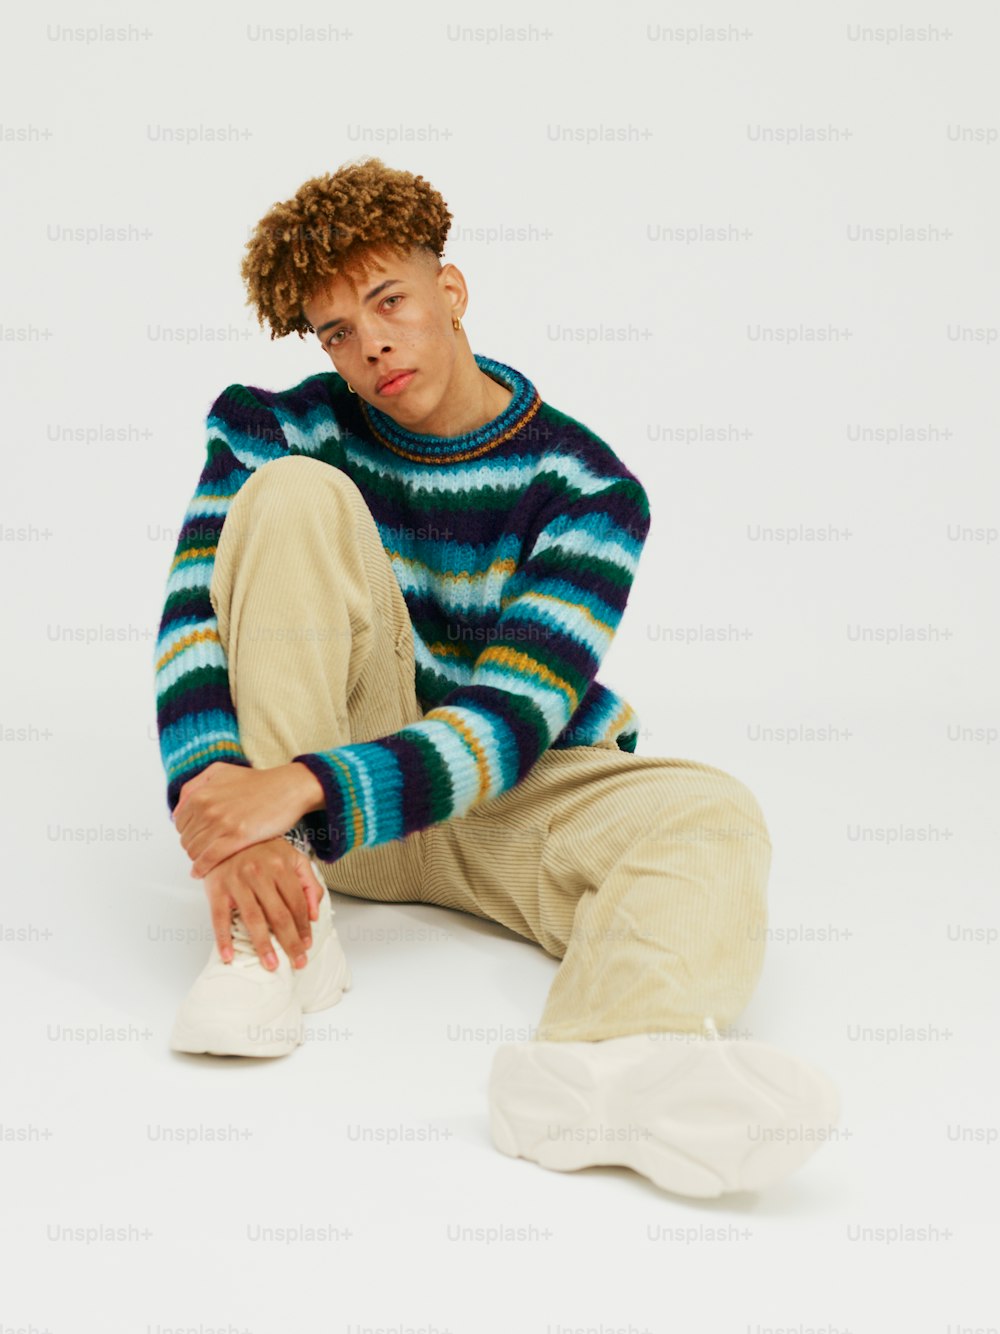 a man sitting on the ground wearing a sweater and pants